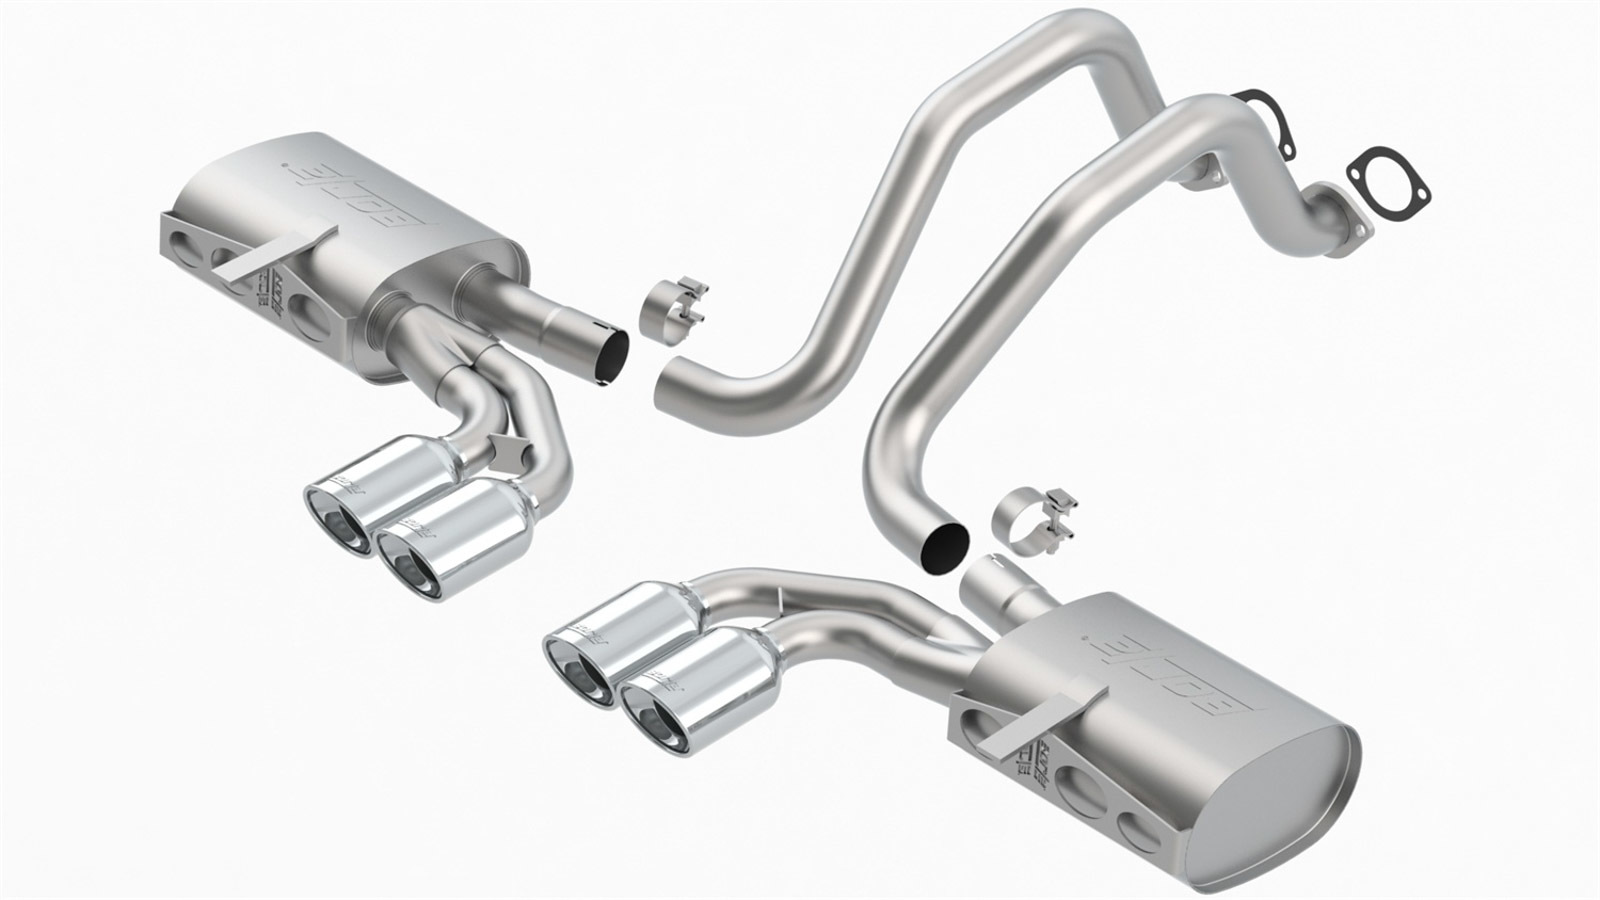 C5 Corvette Borla Exhaust System, S-Type, Cat-Back, 2-1/2 in Intermediate Pipe, 2 in Tailpipe, Stainless Steel